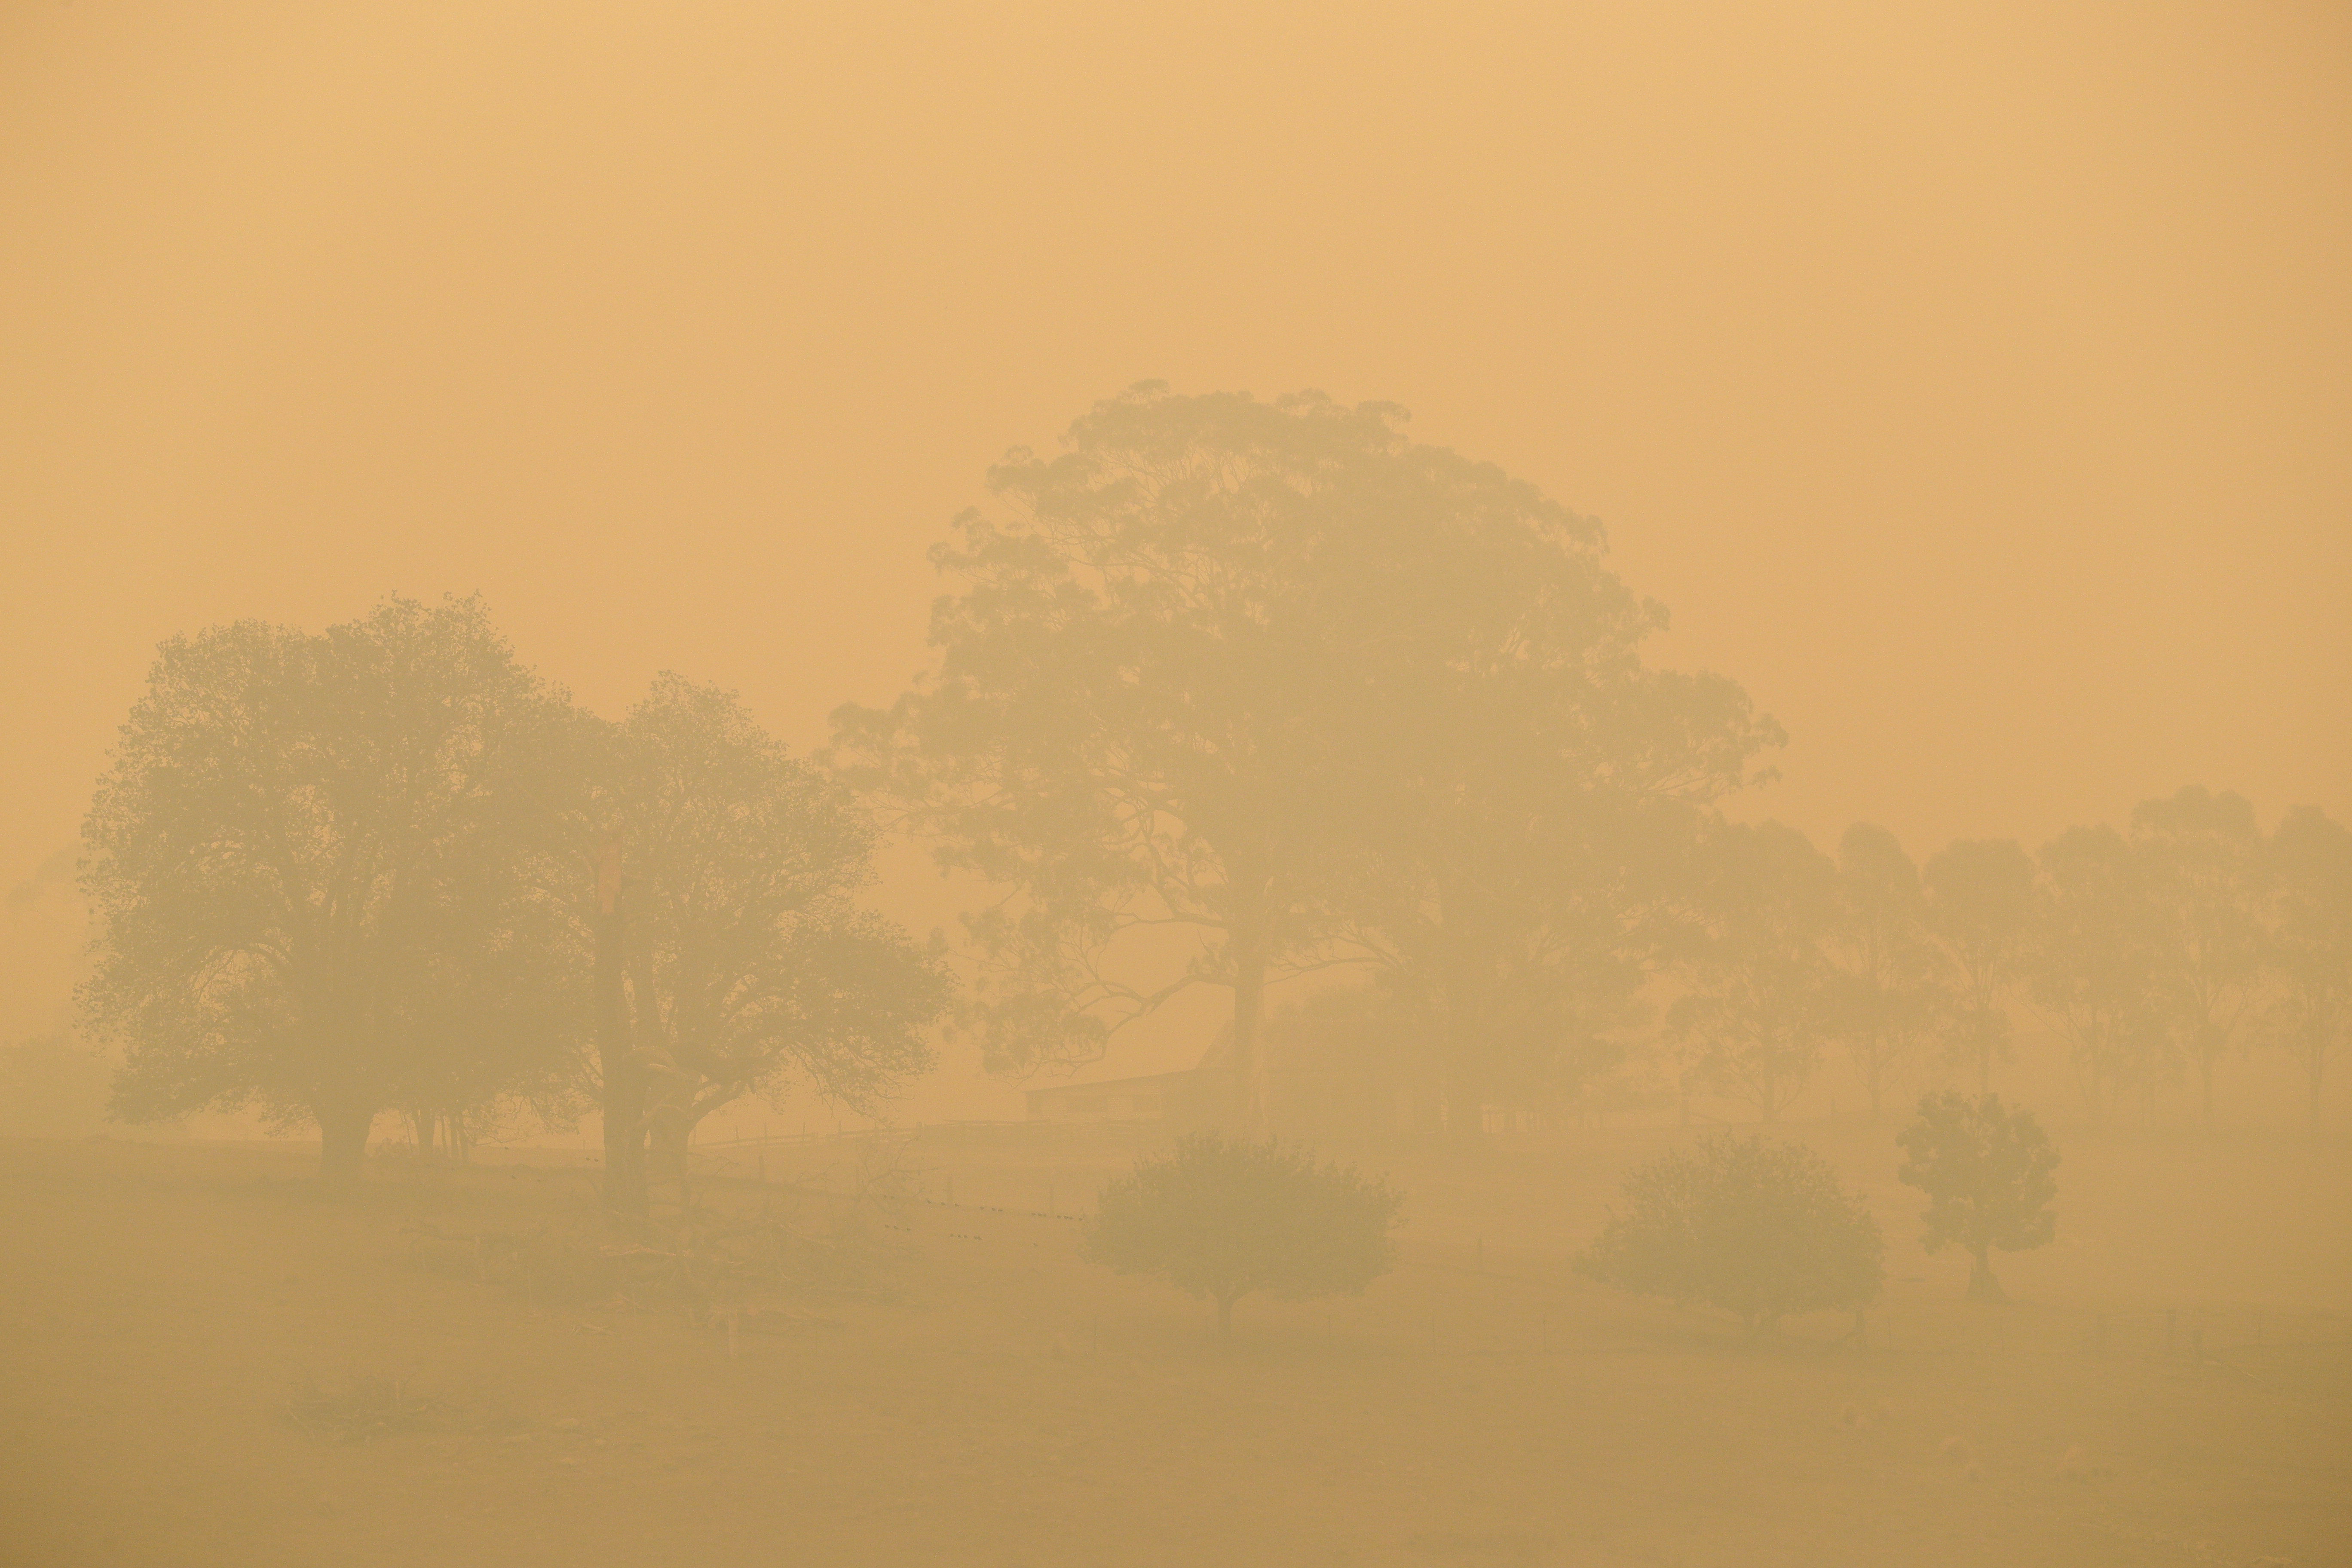 A field is shrouded with smoke haze near Burragate, Australia, Saturday, Jan. 11, 2020. Authorities were assessing the damage after firefighters battled flames fanned by strong winds through the night and lightning strikes sparked new blazes in New South Wales and Victoria, Australia’s most populous states. Conditions were milder Saturday and forecast to remain relatively benign for the next week. (AP Photo/Rick Rycroft)